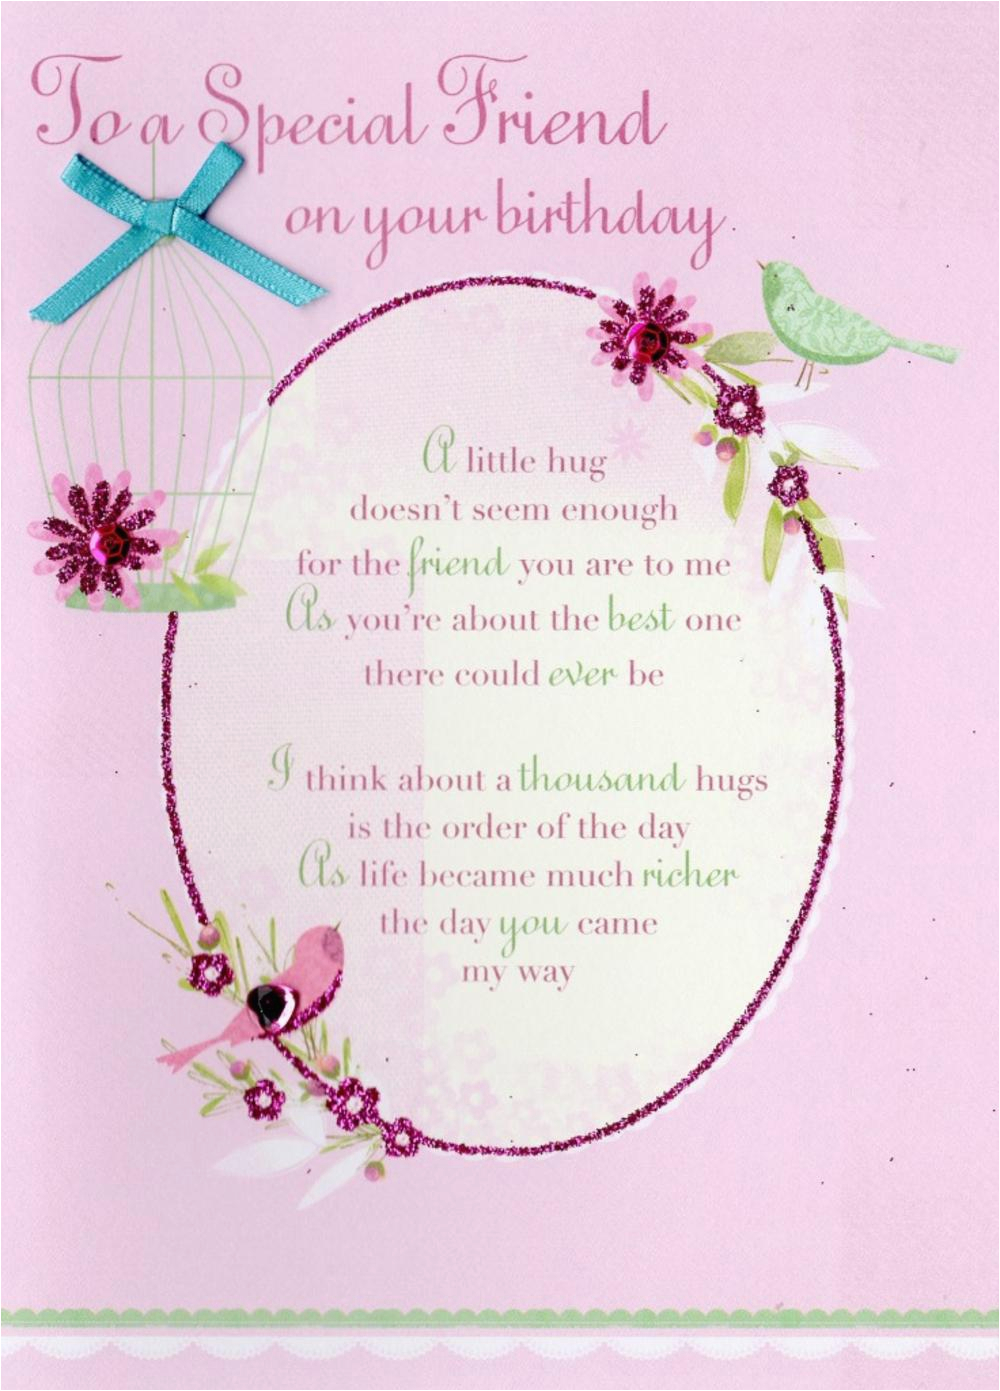 kcsnhwd008 special friend birthday greeting card second nature poetic words cards